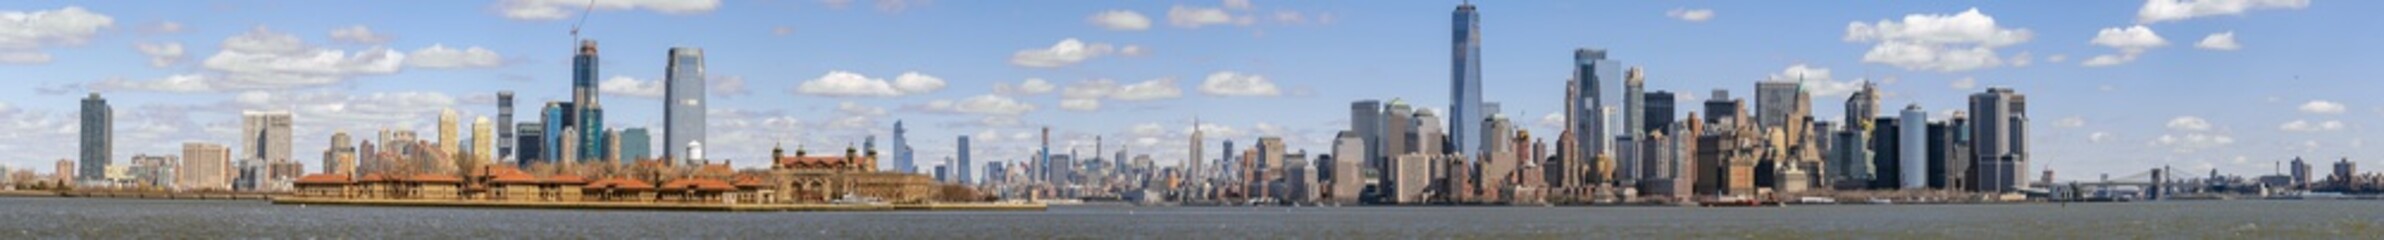 Panorama Scene of New york cityscape river side which location is lower manhattan,Architecture and...